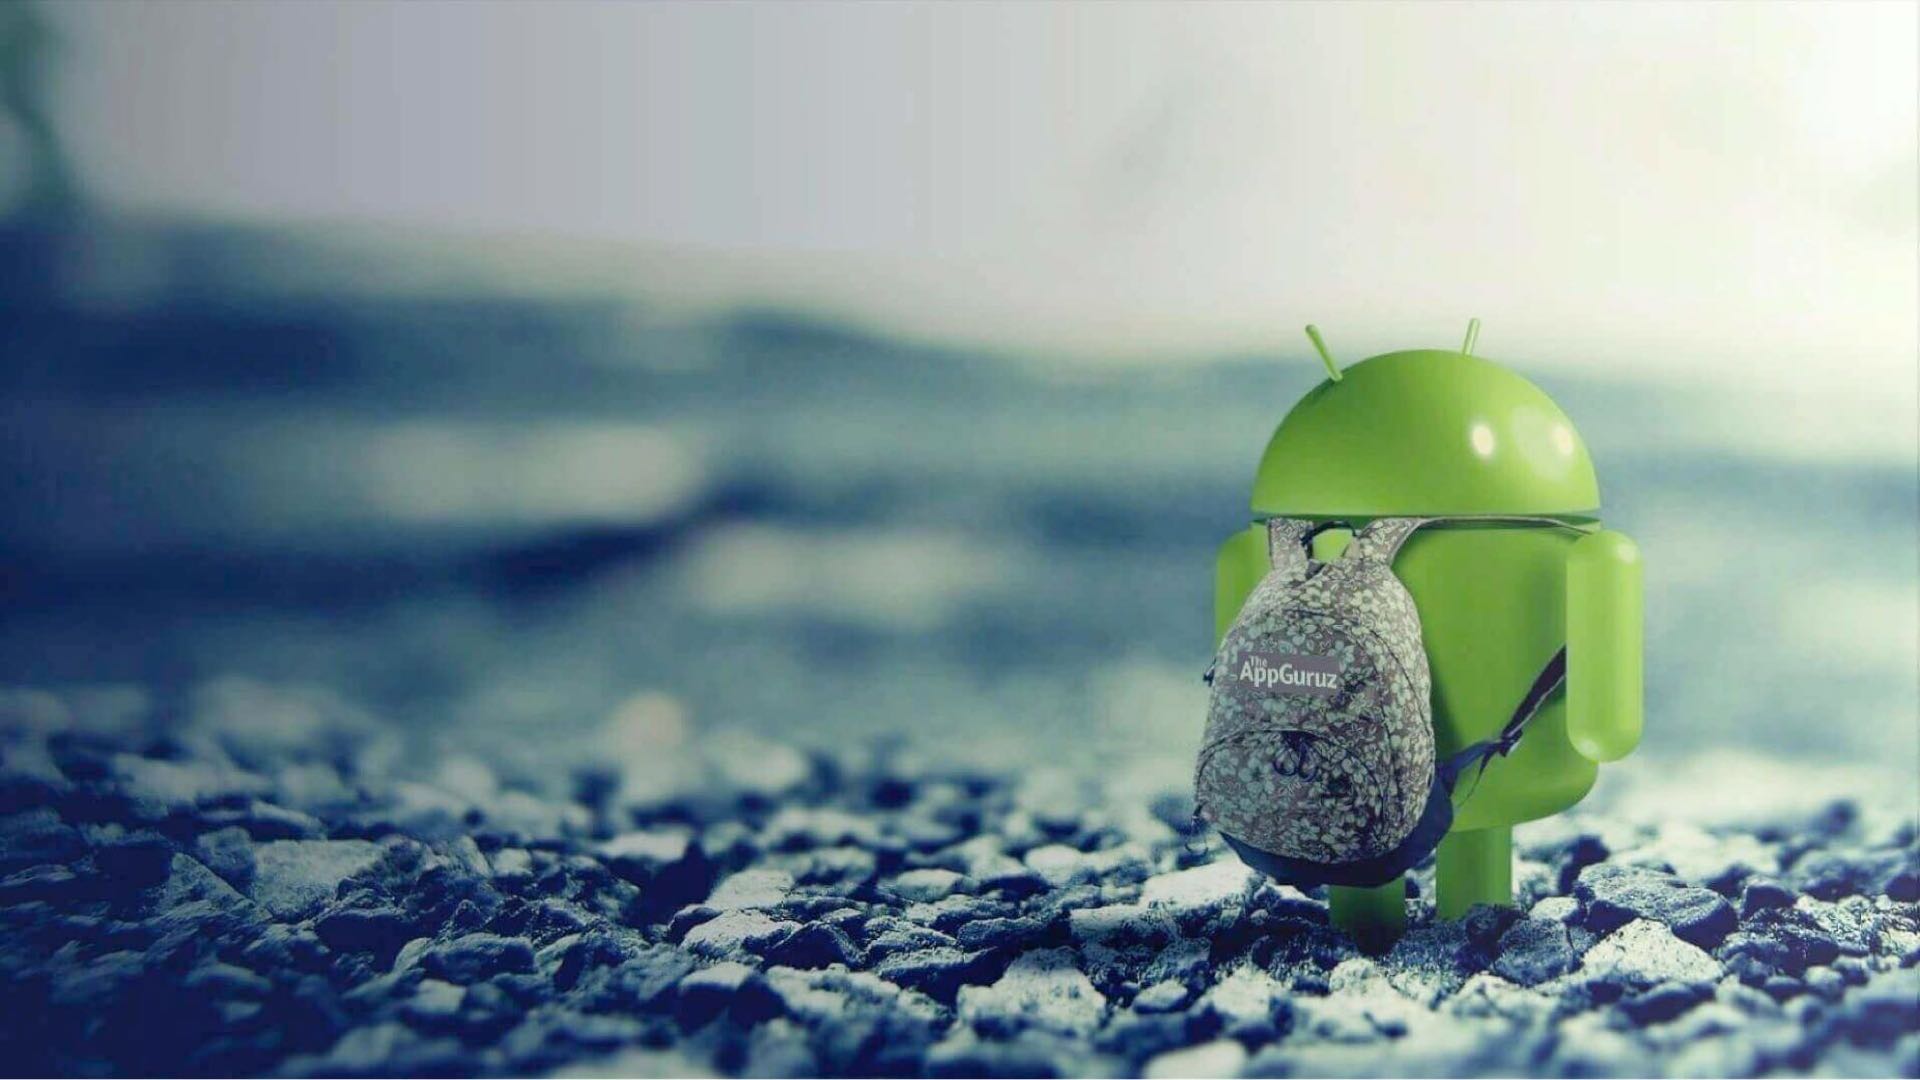 android developer wallpaper,green,water,organism,freezing,photography